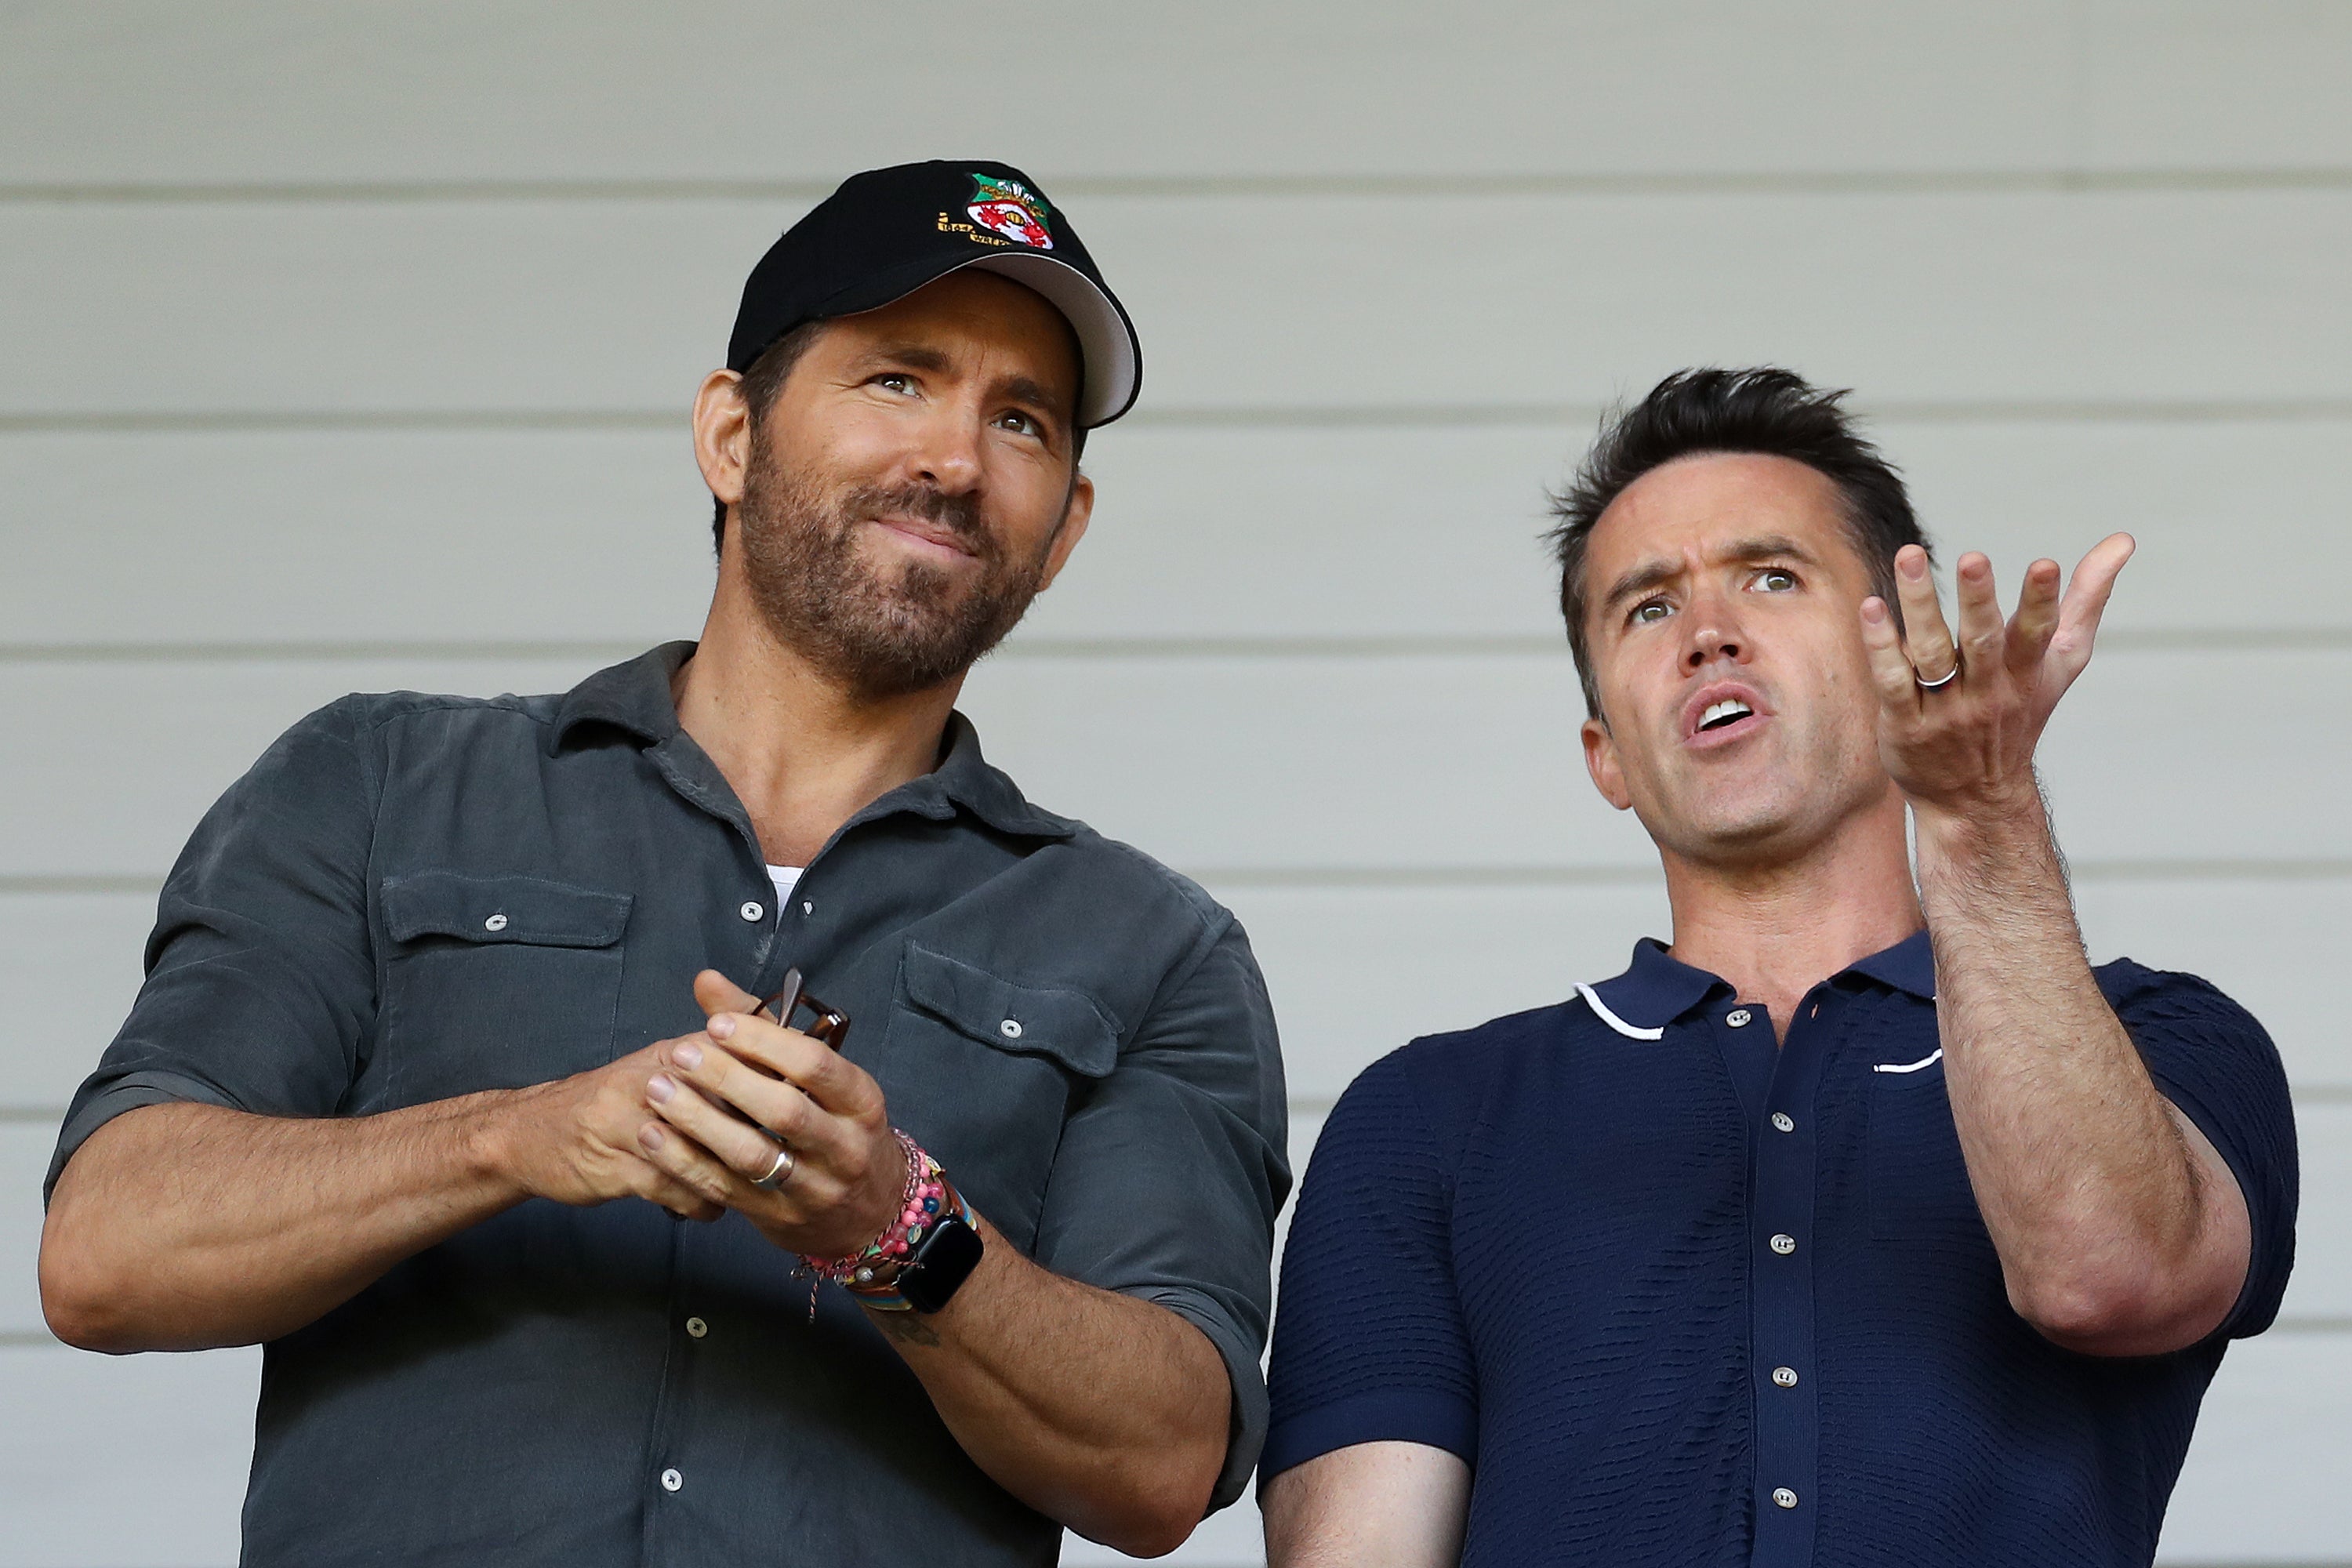 Ryan Reynolds and Rob McElhenney have seen a hurge surge in interest in Wrexham since taking over